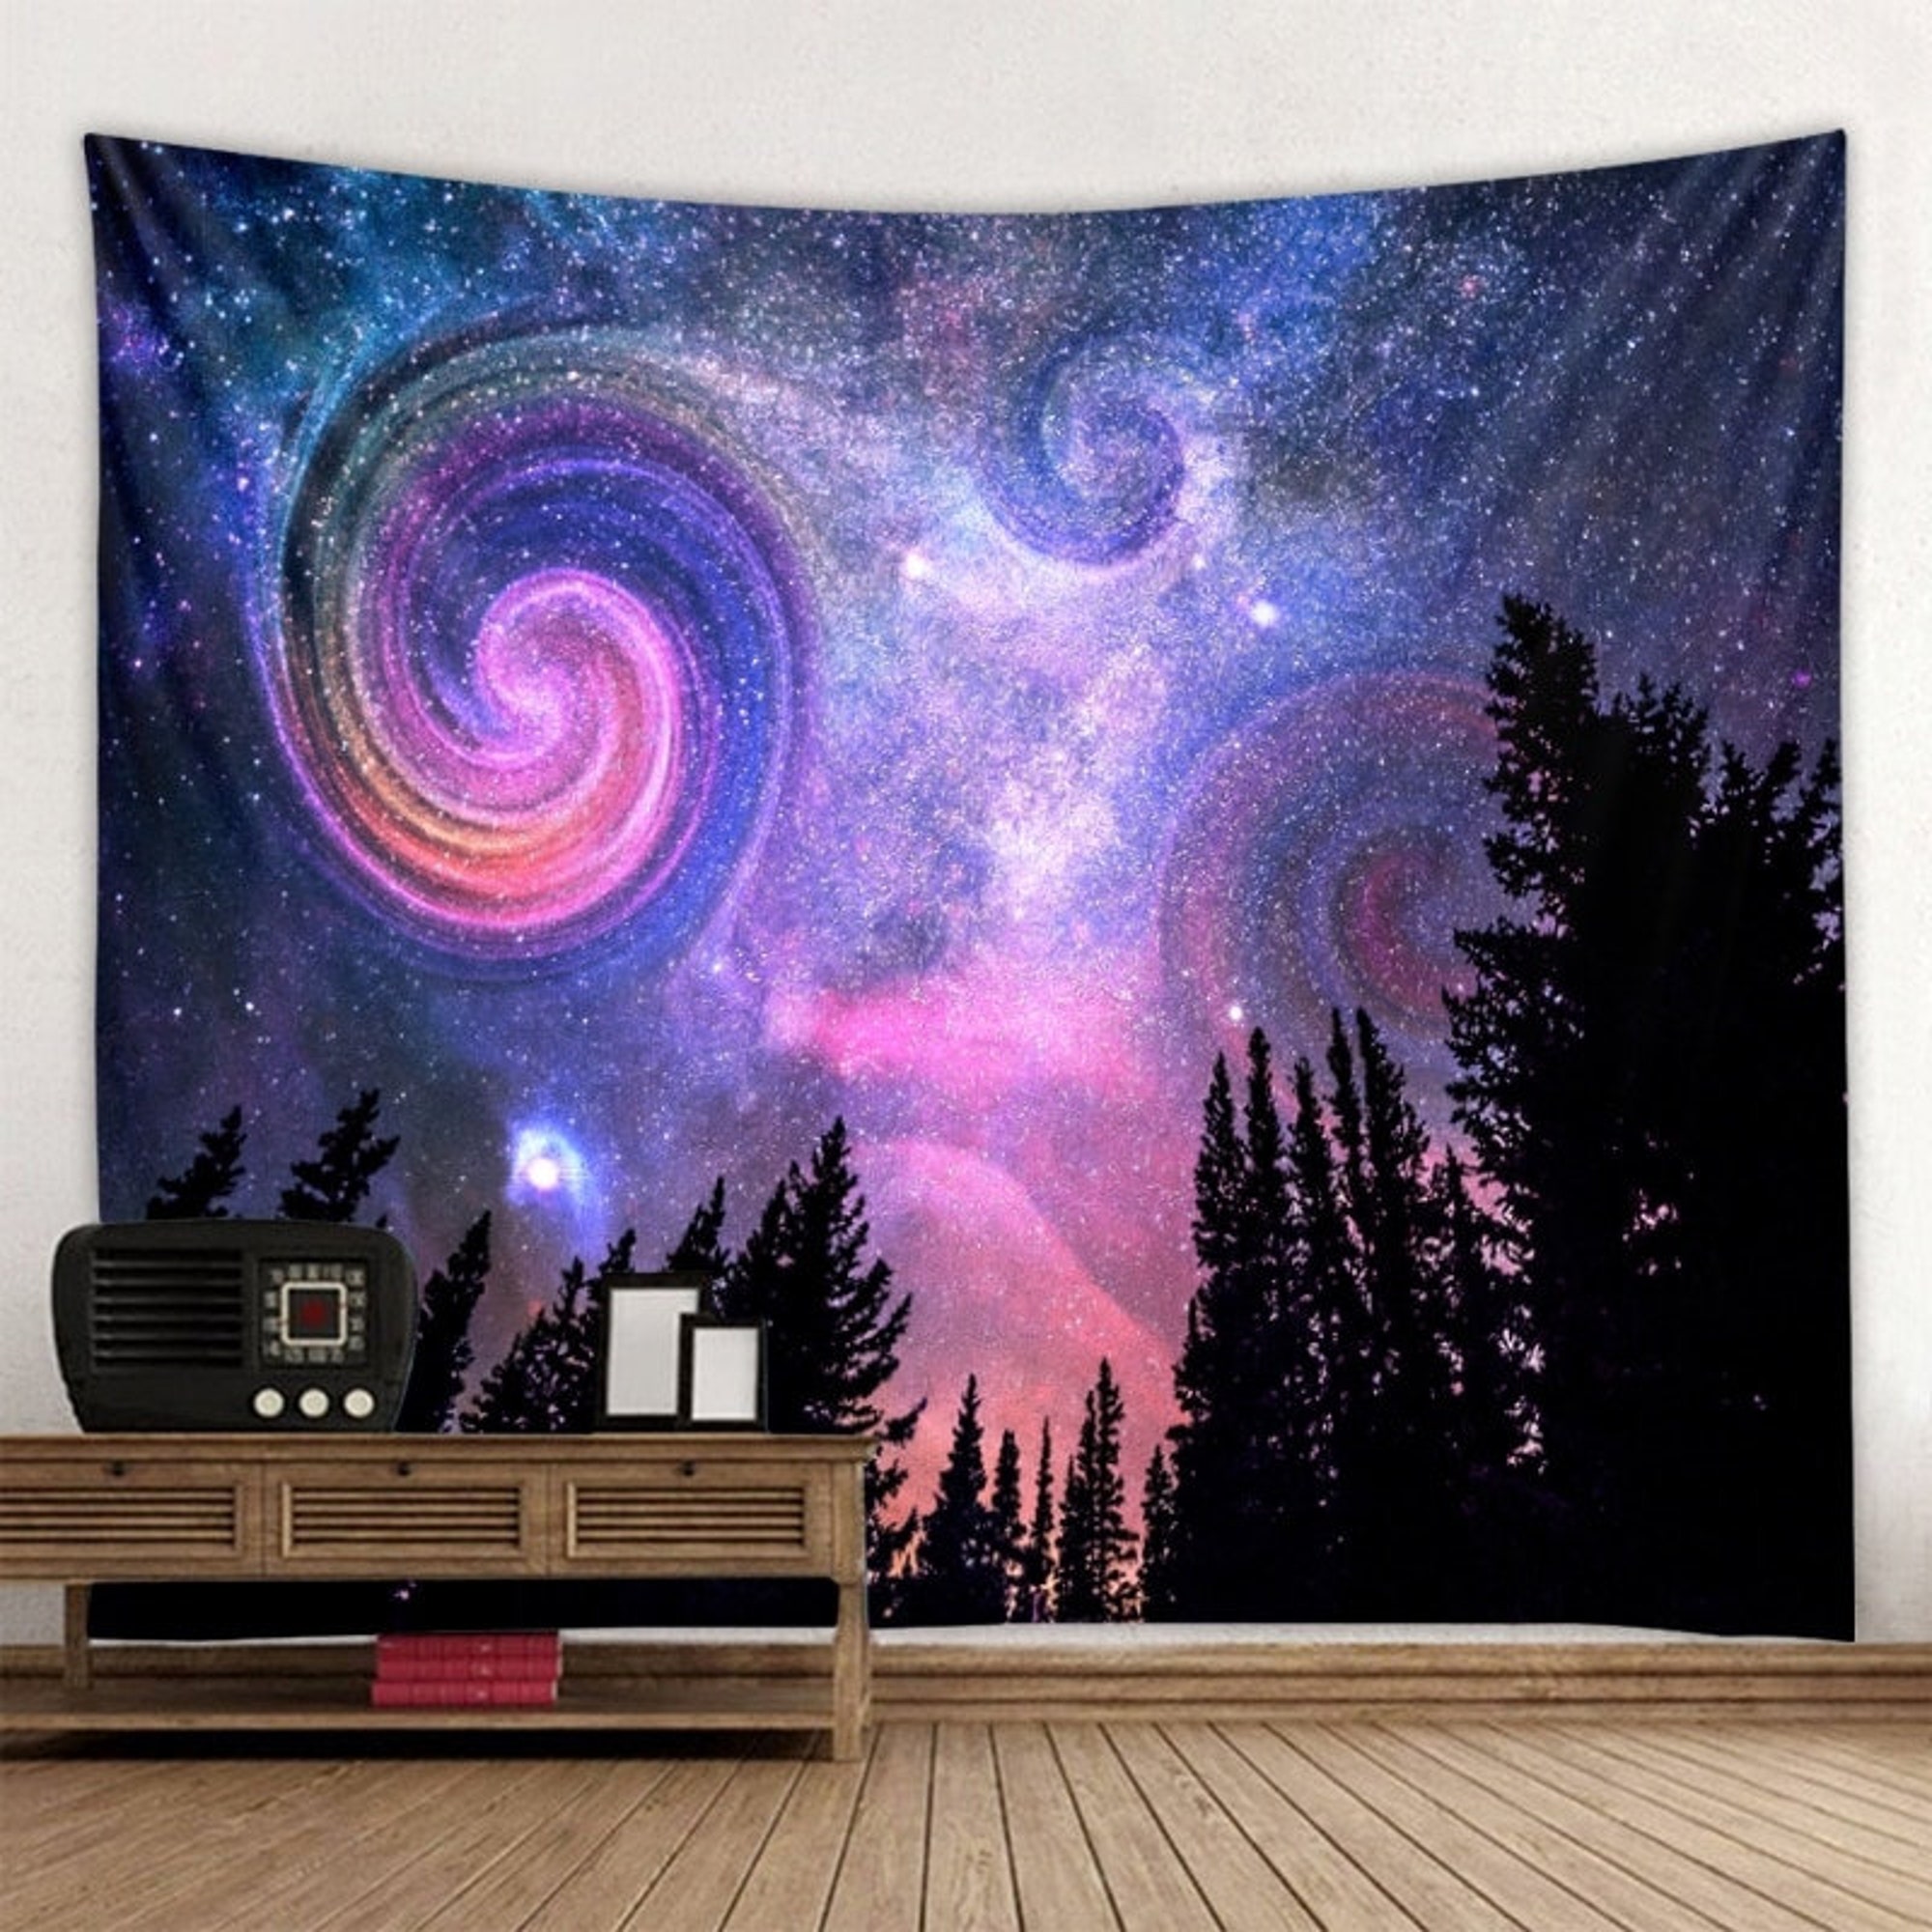 Starry Night Sky Tapestry Trees Starry Sky Wall Tapestry Galaxy Wall Hanging Art Tapestries Wall Decor